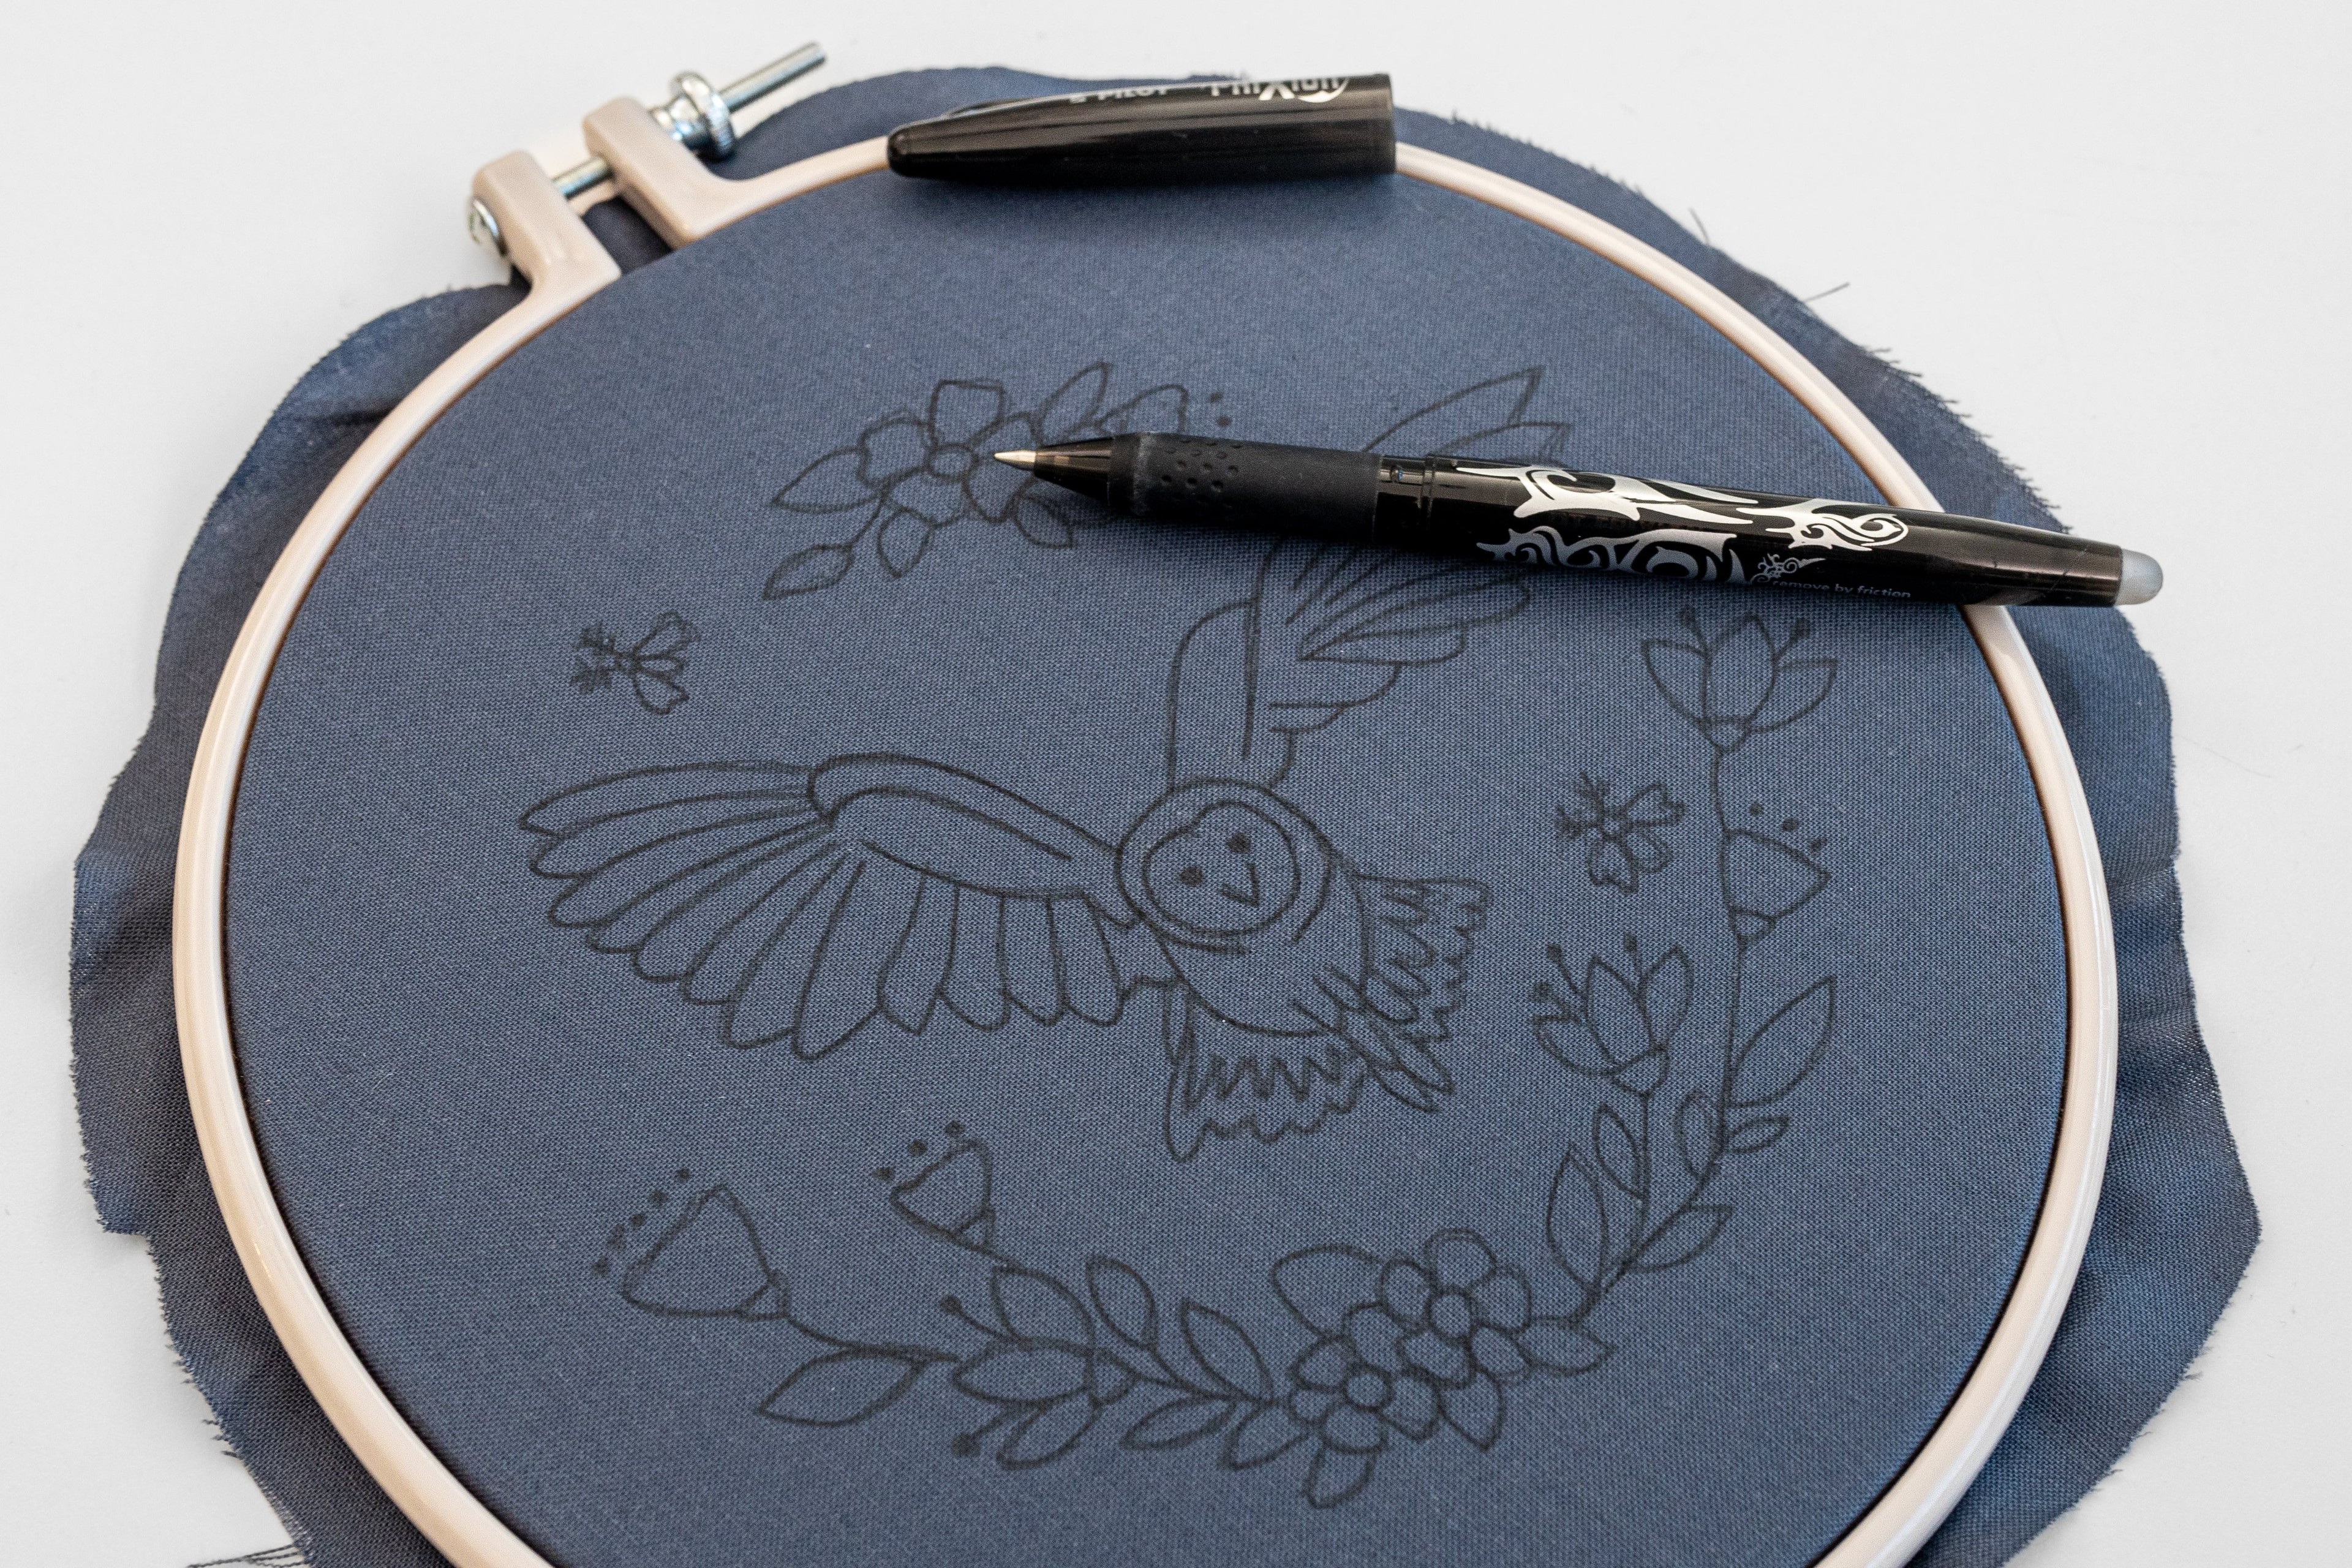 A pen lies on a fabric with 'The Night Owl' pattern drawn on it.